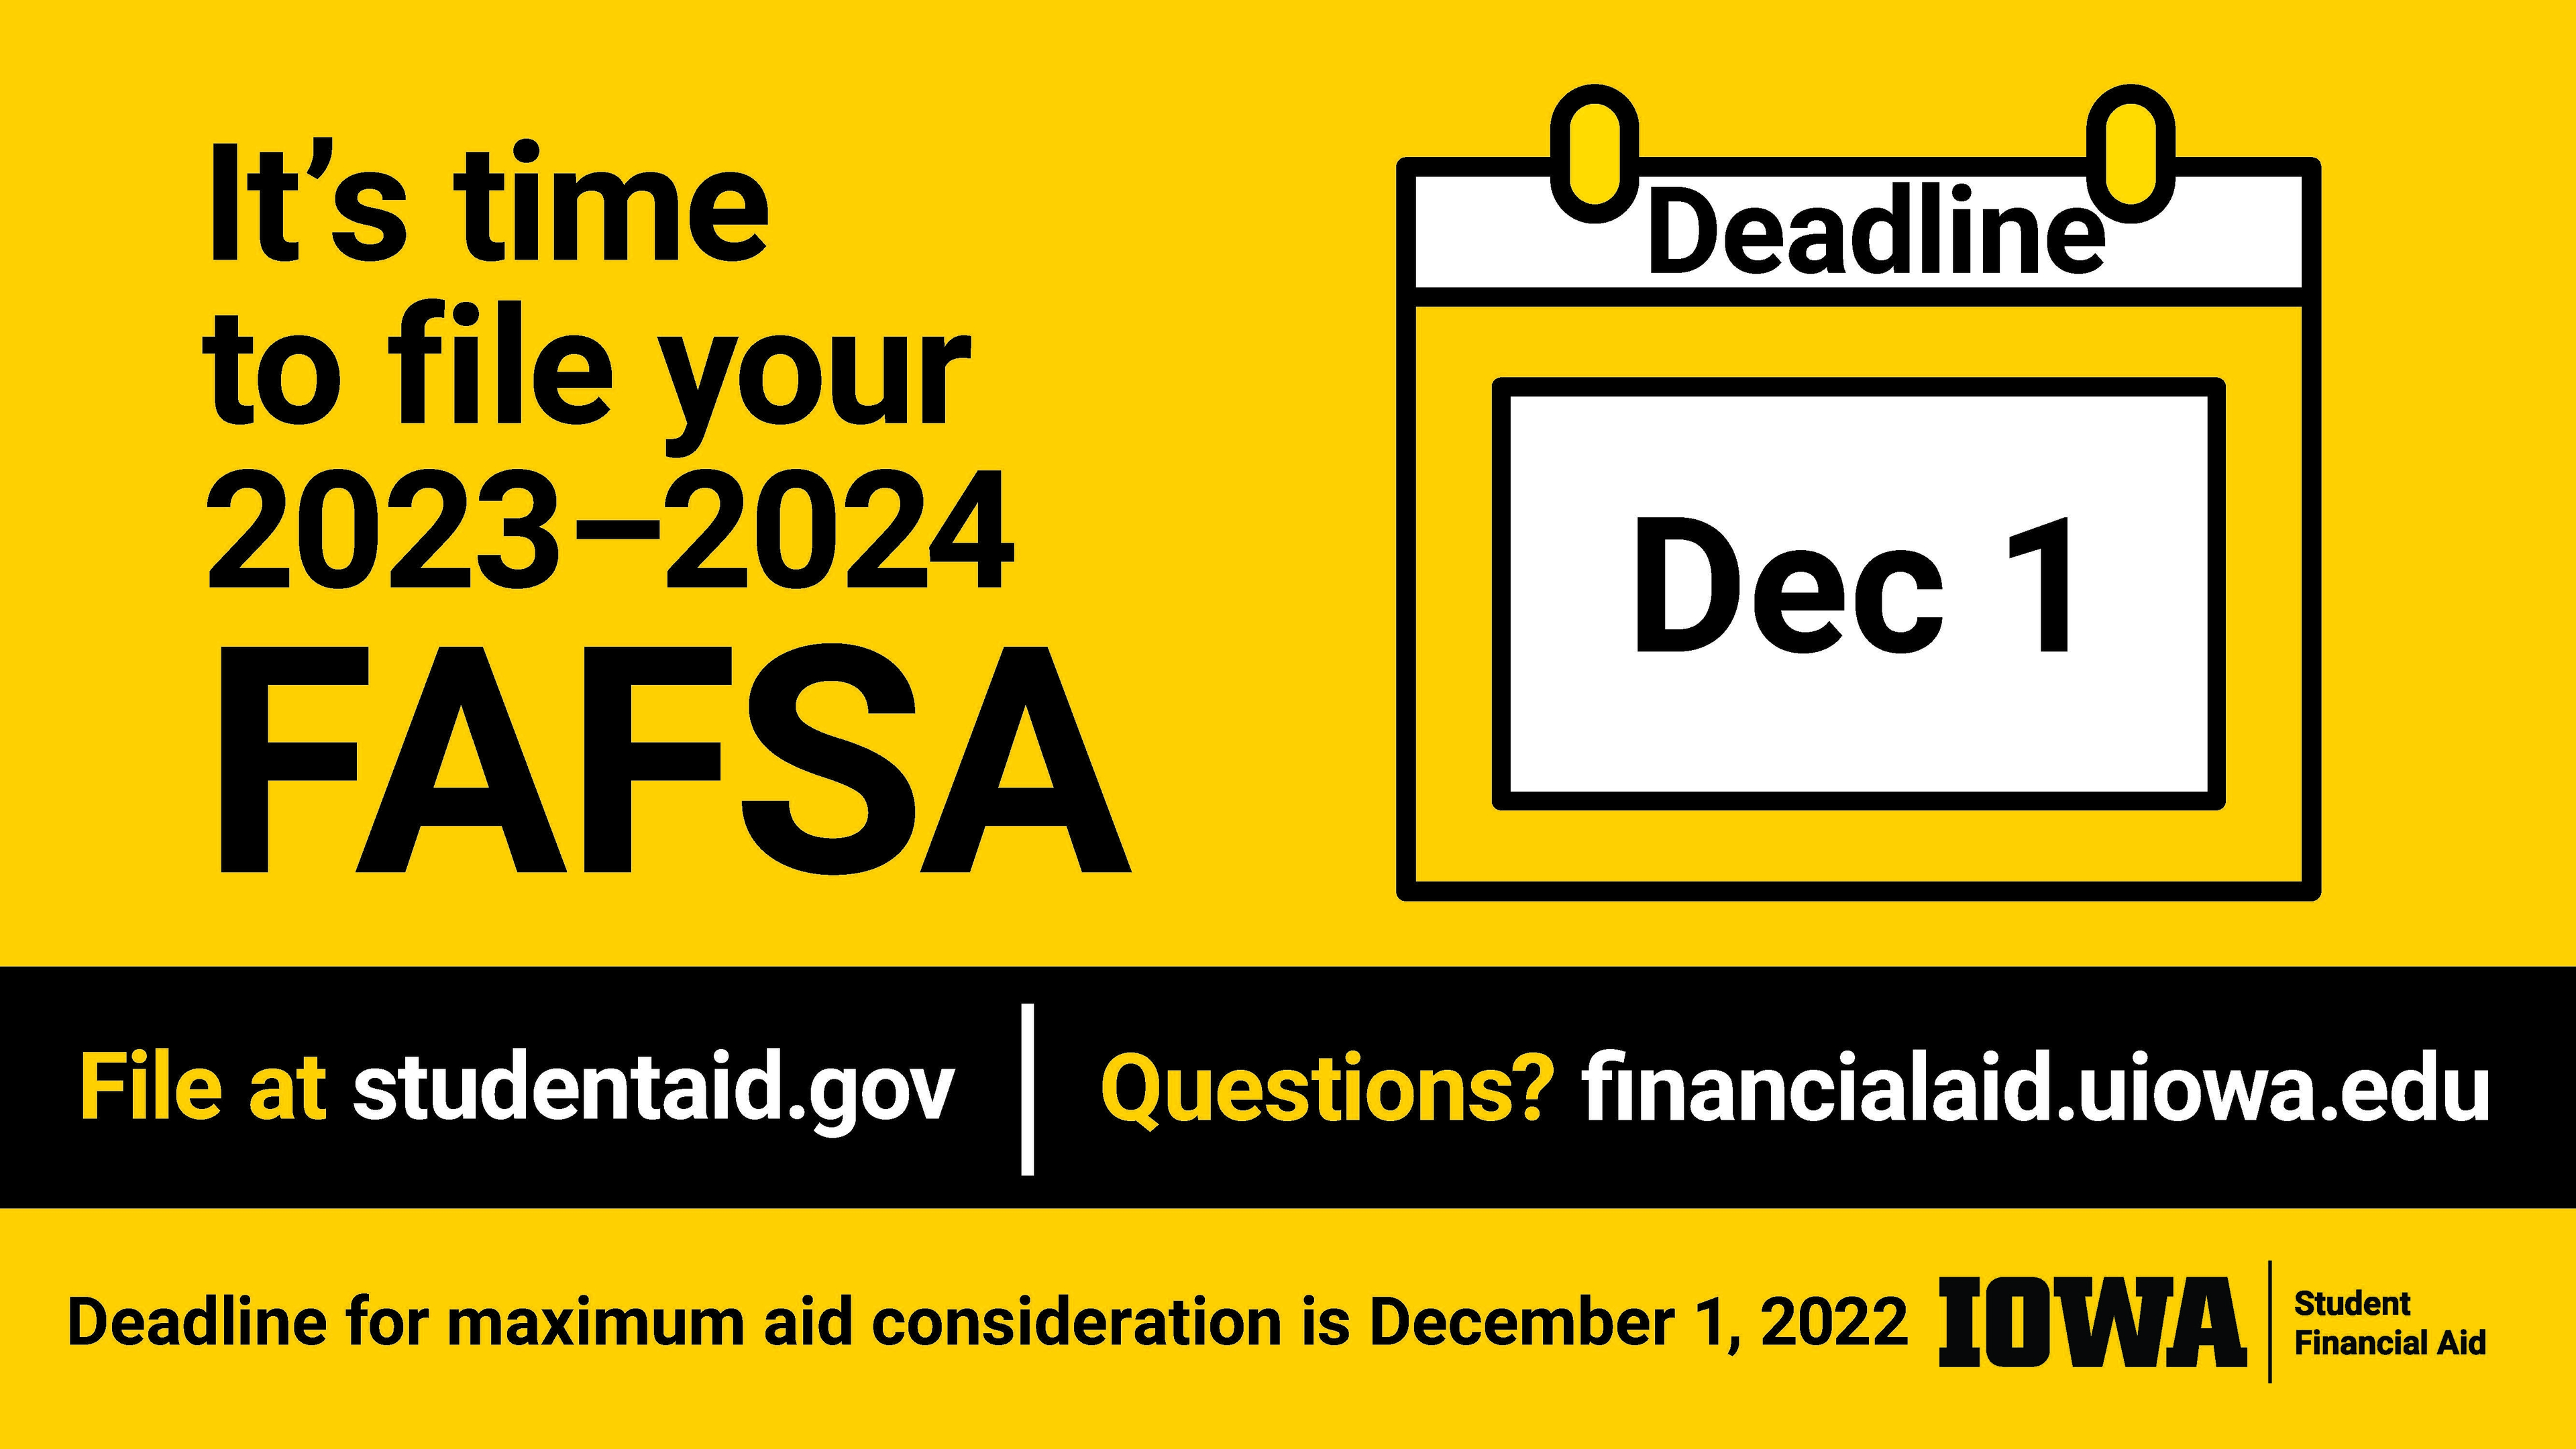 It's time to file your 2023-2024 FAFSA! File at studentaid.gov